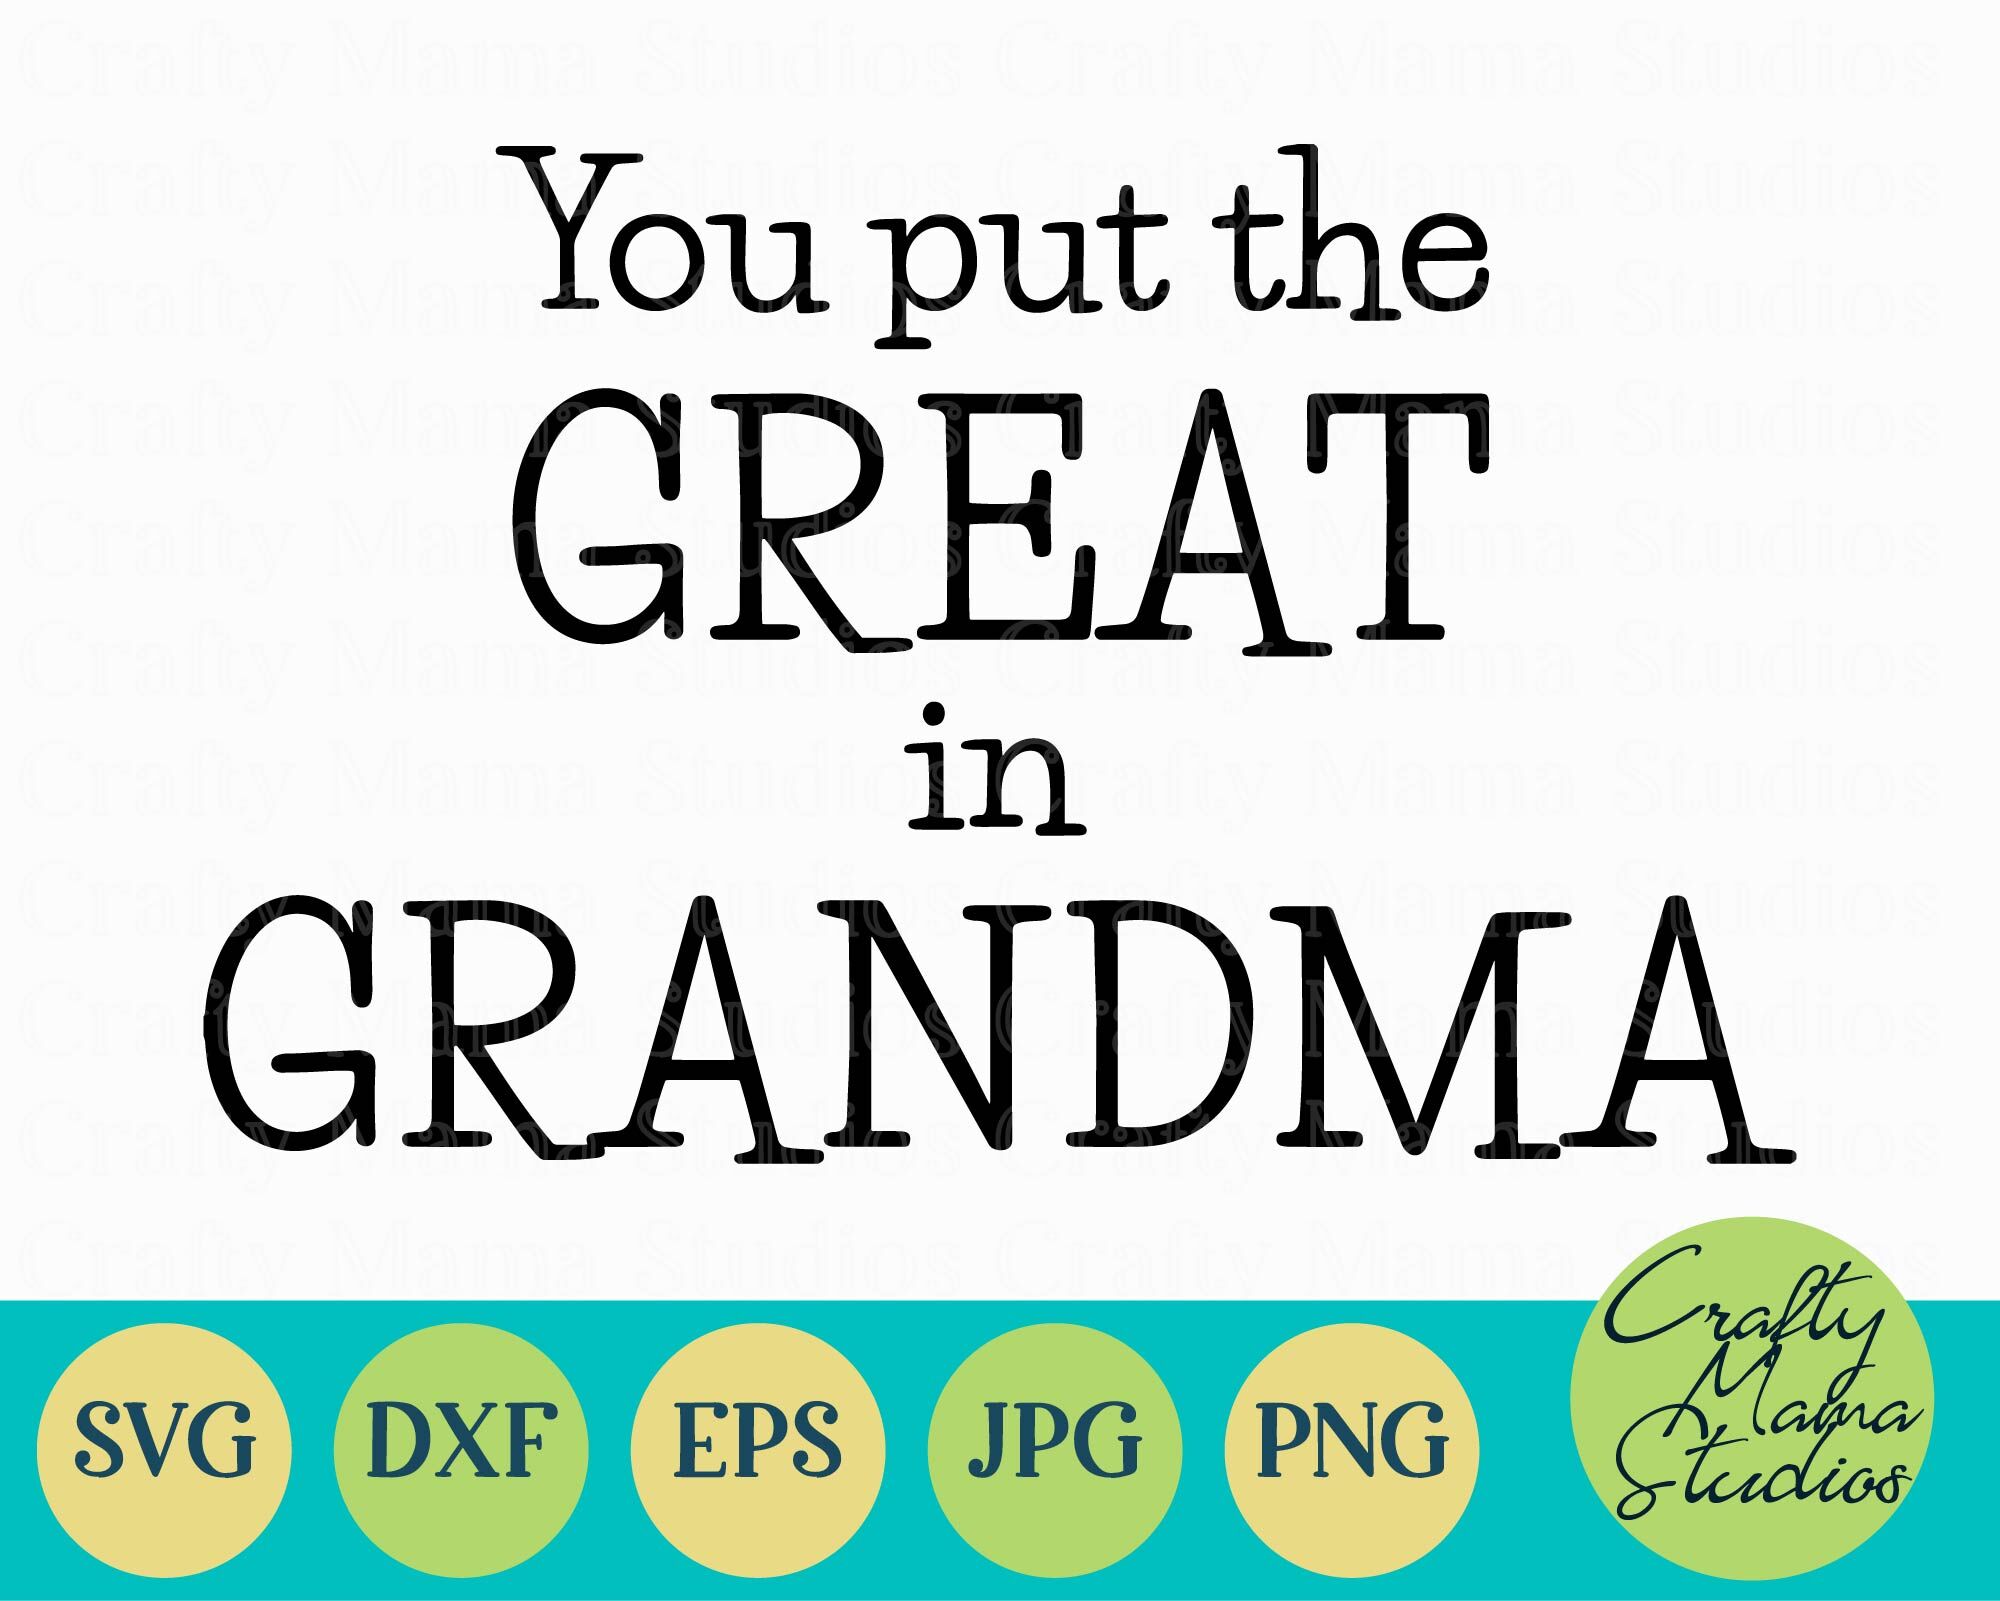 Download Free Icons Free Vector Icons Free Svg Psd Best Great Grandma Svg